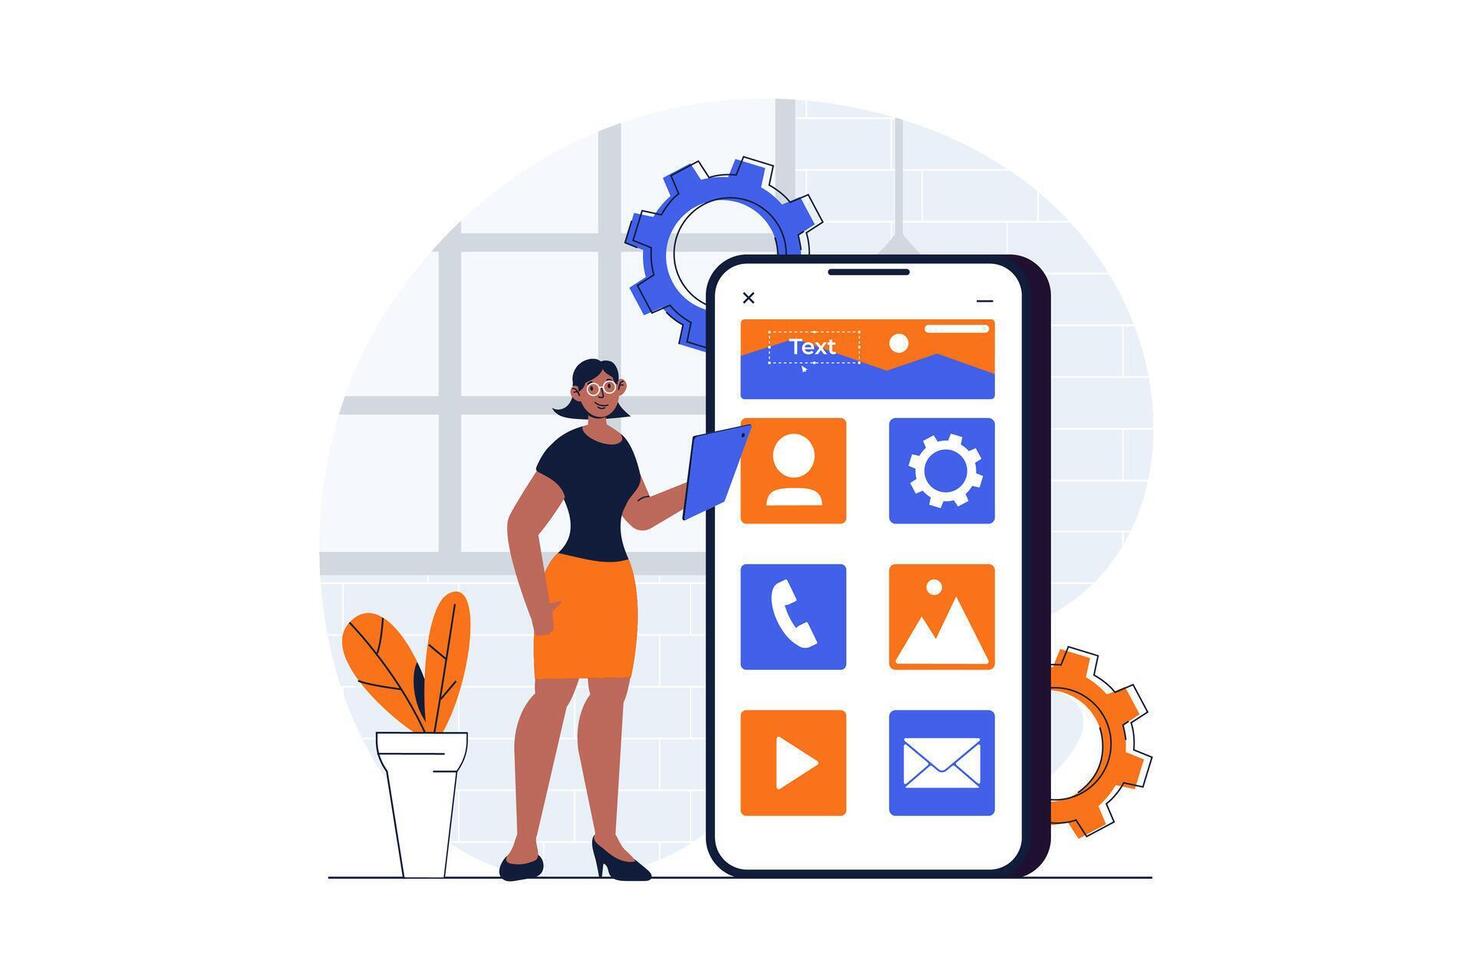 UI UX development web concept with character scene. Woman making wireframe template for mobile applications. People situation in flat design. Vector illustration for social media marketing material.